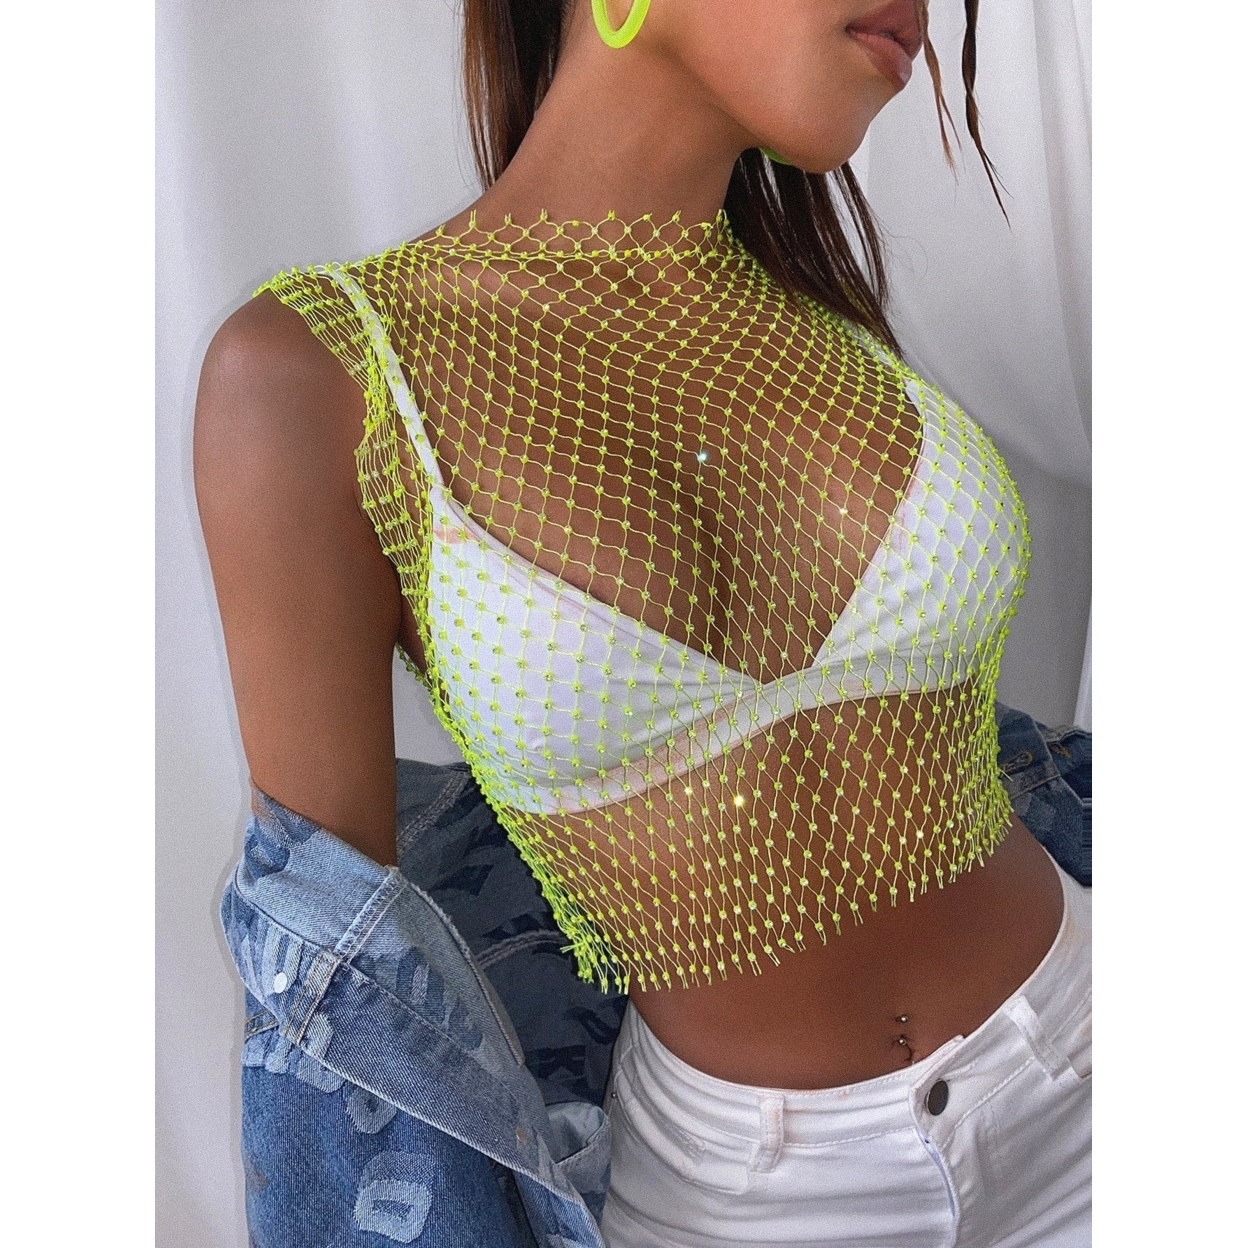 Rhinestone Detail Fishnet Top Without Bra - Lime Green, Xs